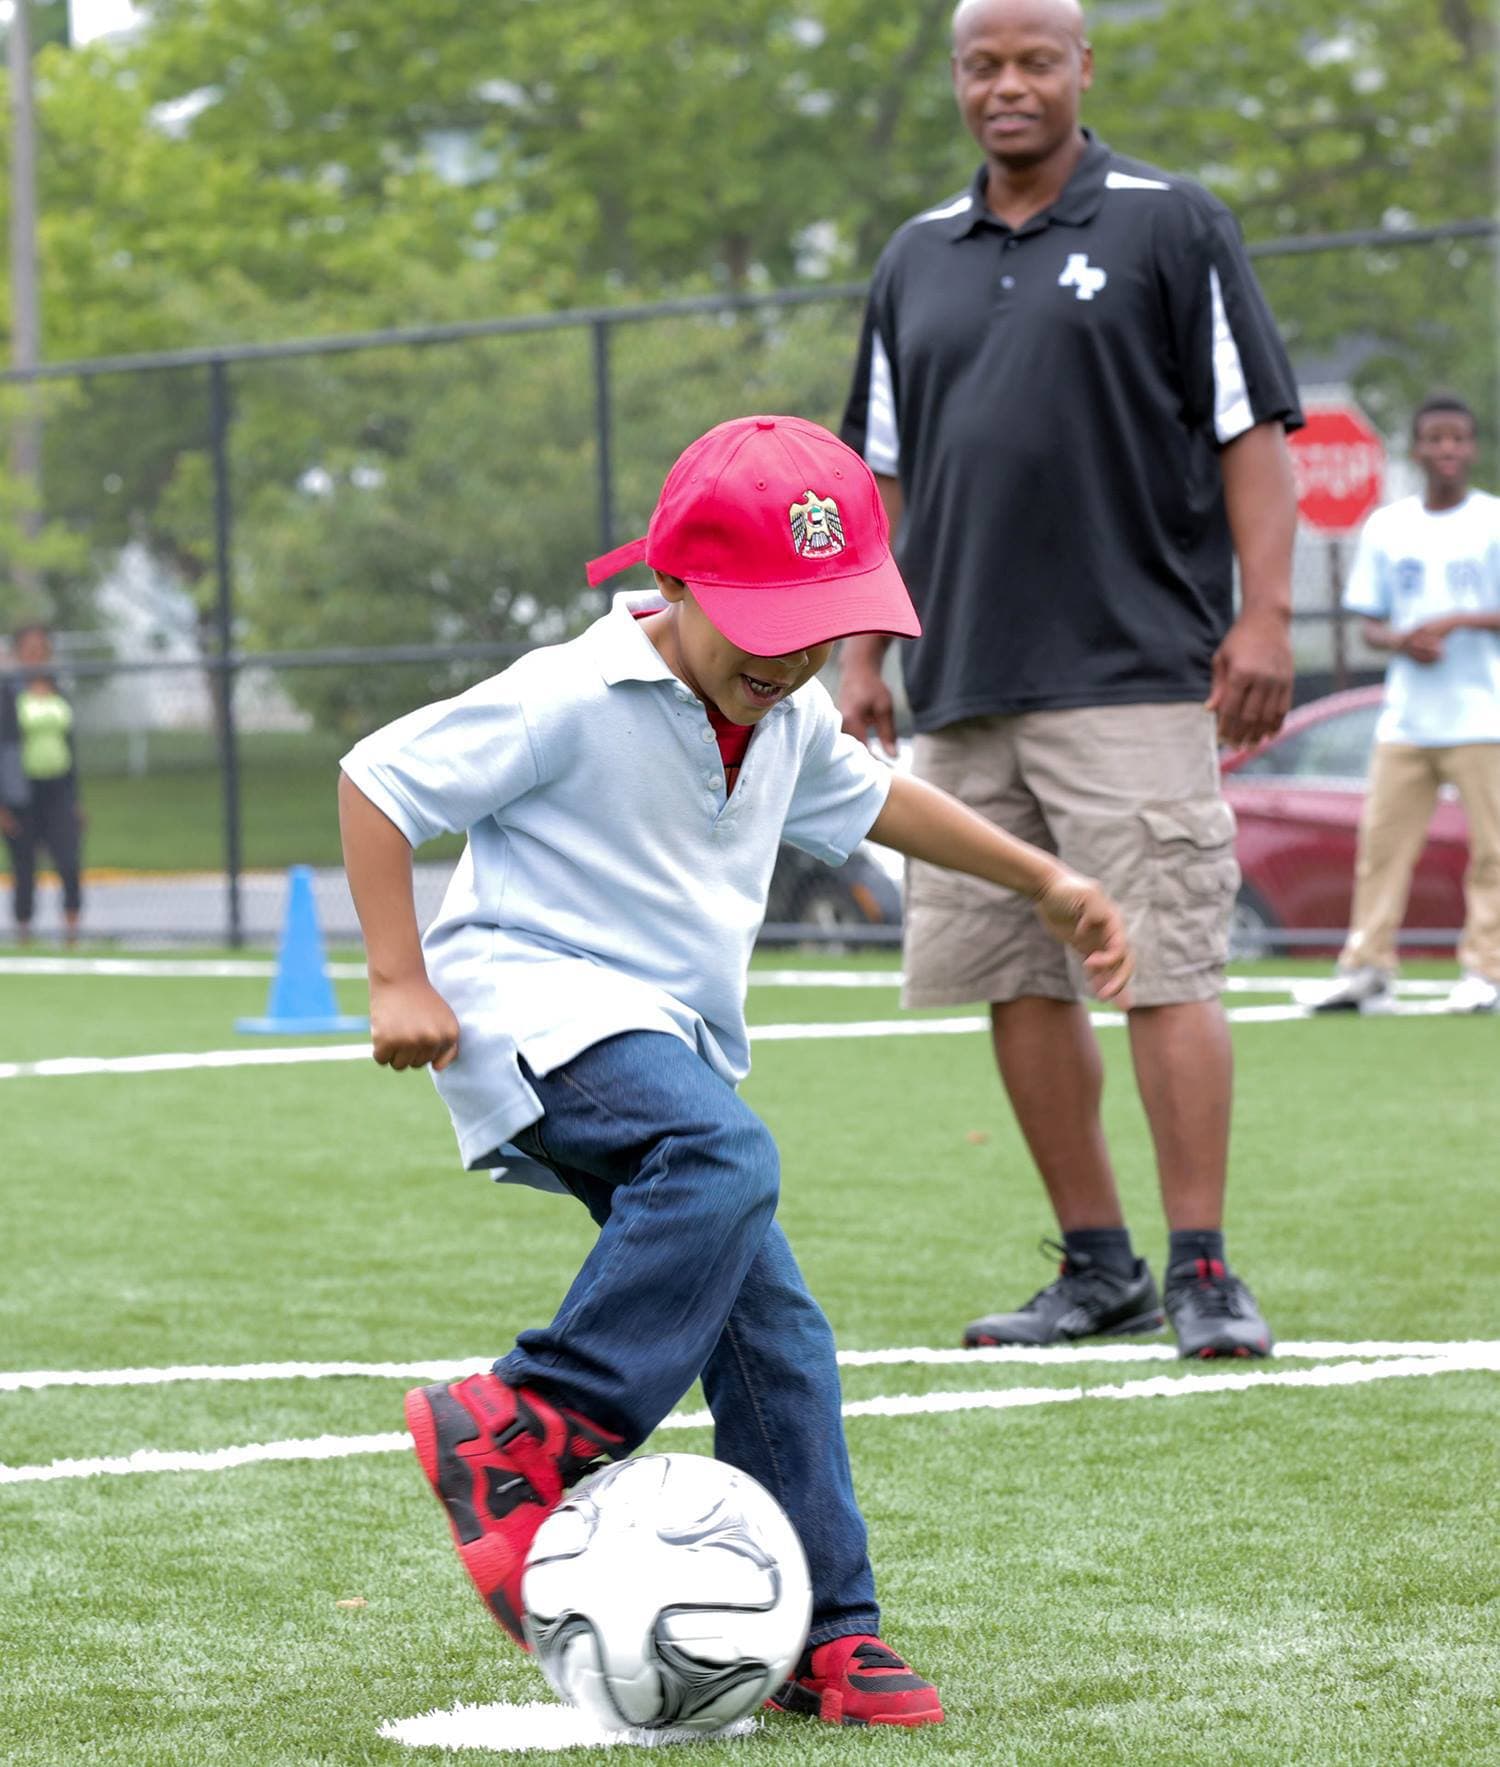  Thousands of deserving kids benefitted from soccer fields that have been constructed in Atlantic City, Dallas, Washington, DC, New York City, East Los Angeles, Chicago and Miami as a key component of UAE’s community efforts in the US. http://uaeusaunited.com/story/community-soccer.